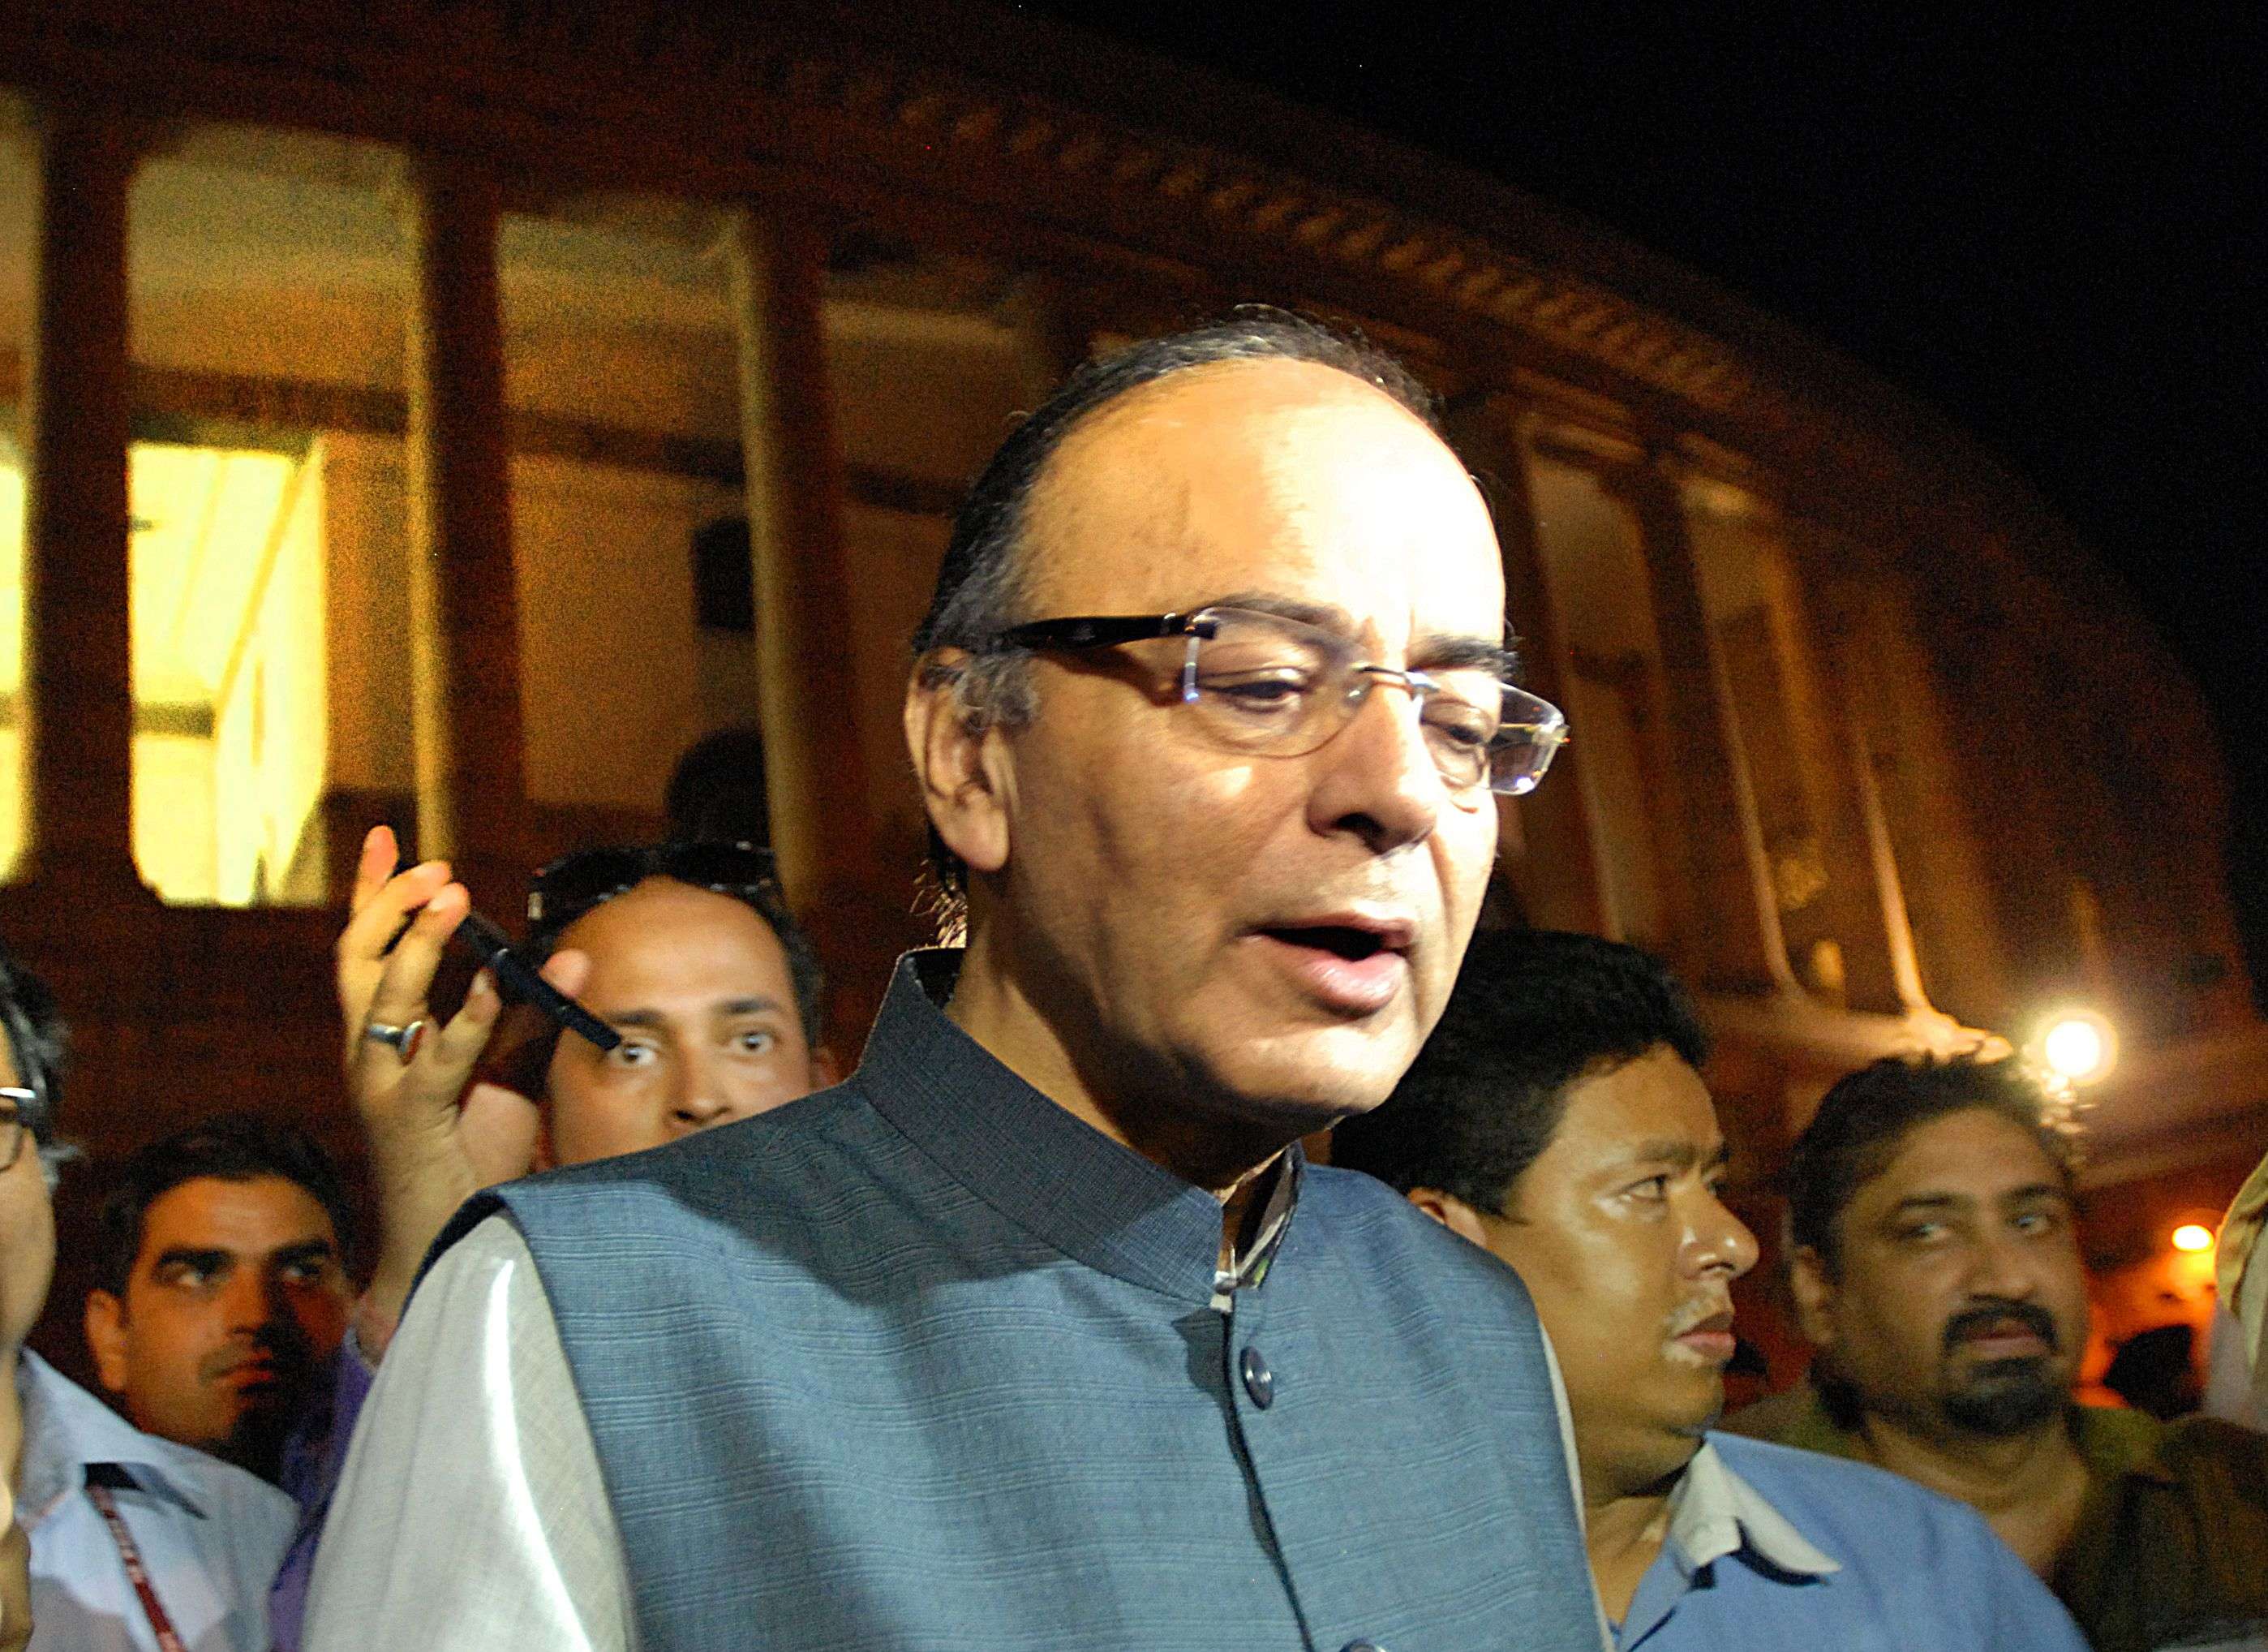 Finance Minister Arun Jaitley comes out from Rajya Sabha after the voting on the GST Bill in New Delhi on Wednesday. --- Piyal Bhattacharjee